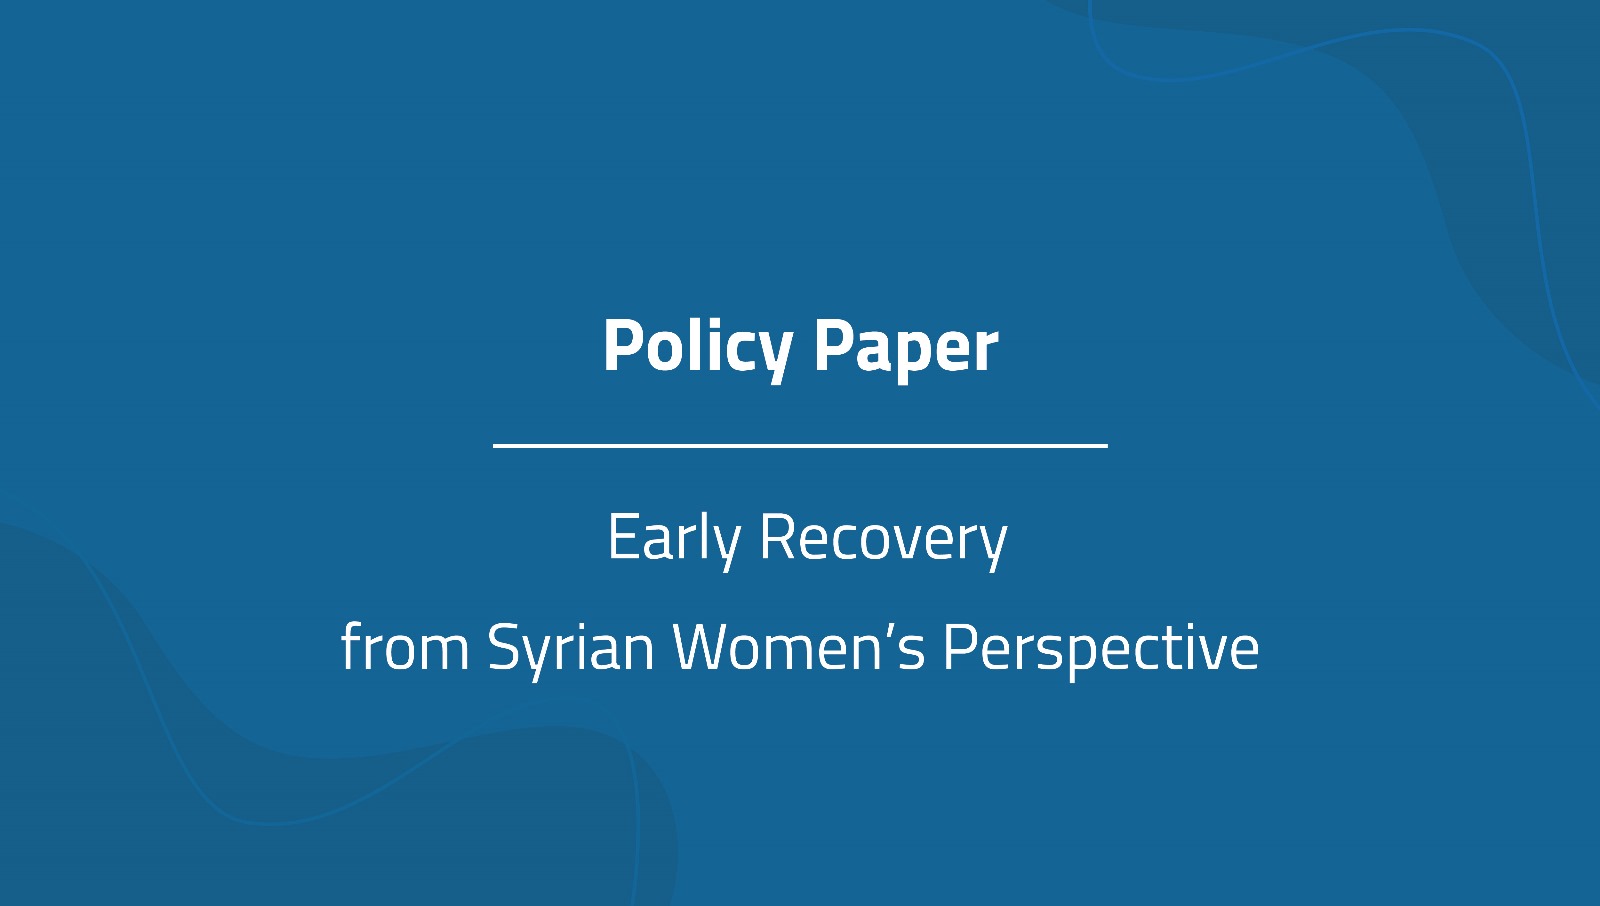 Early Recovery from Syrian Women’s Perspective